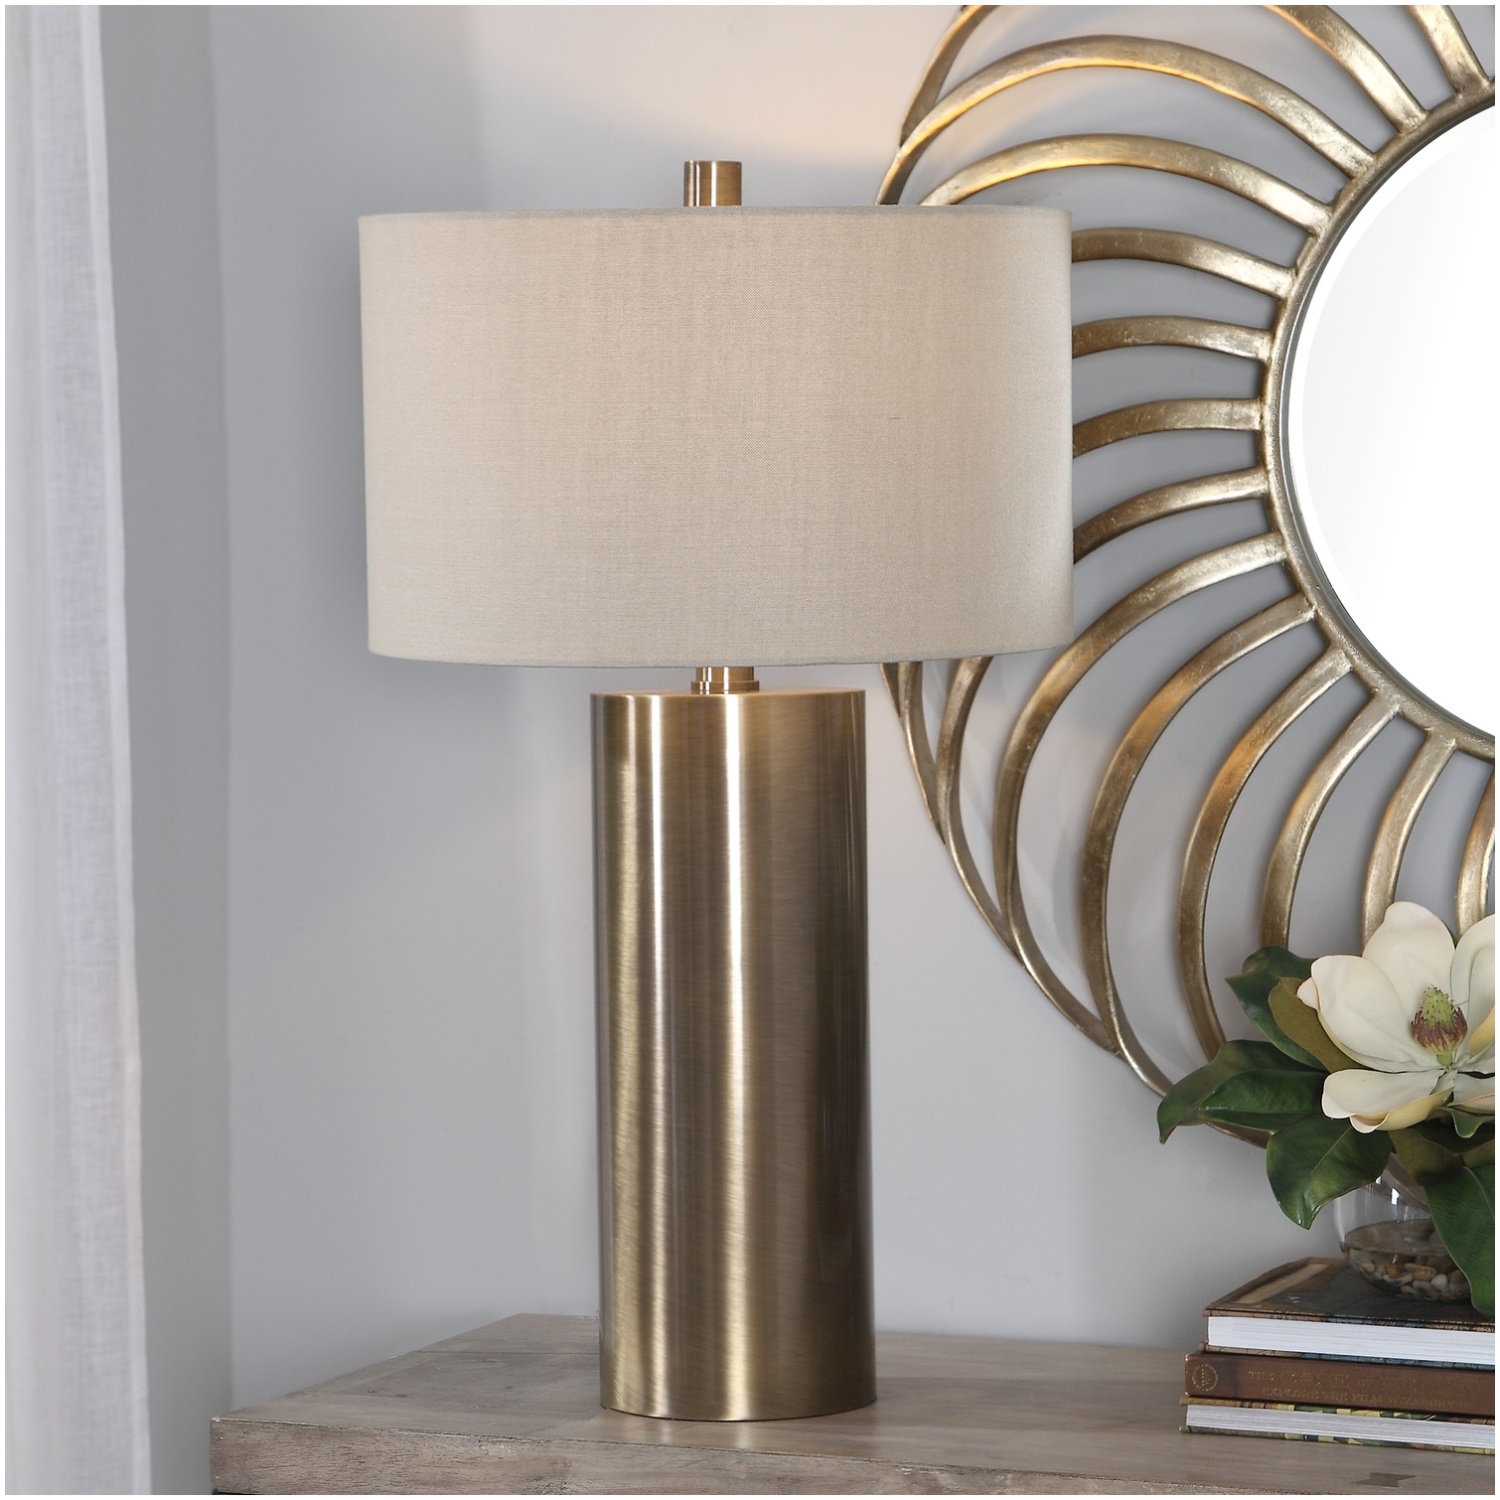 Uttermost Taria Brushed Brass Table Lamp